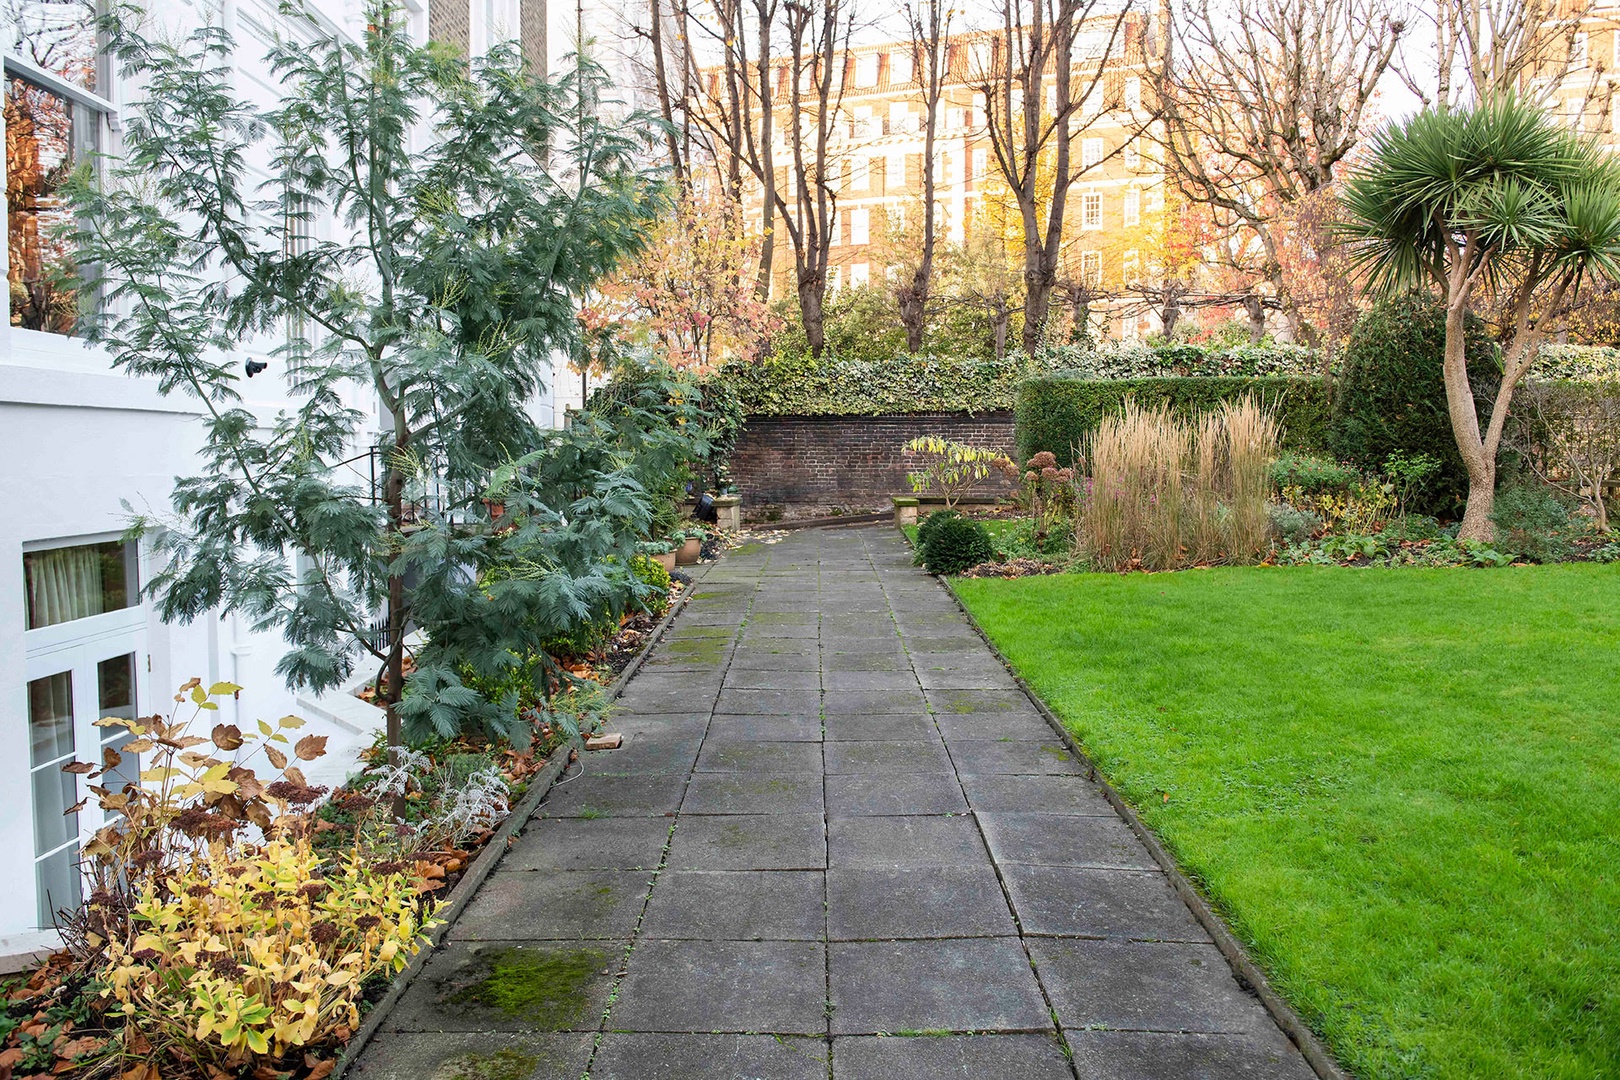 The Phillimore's private communal garden is a rare find in London.